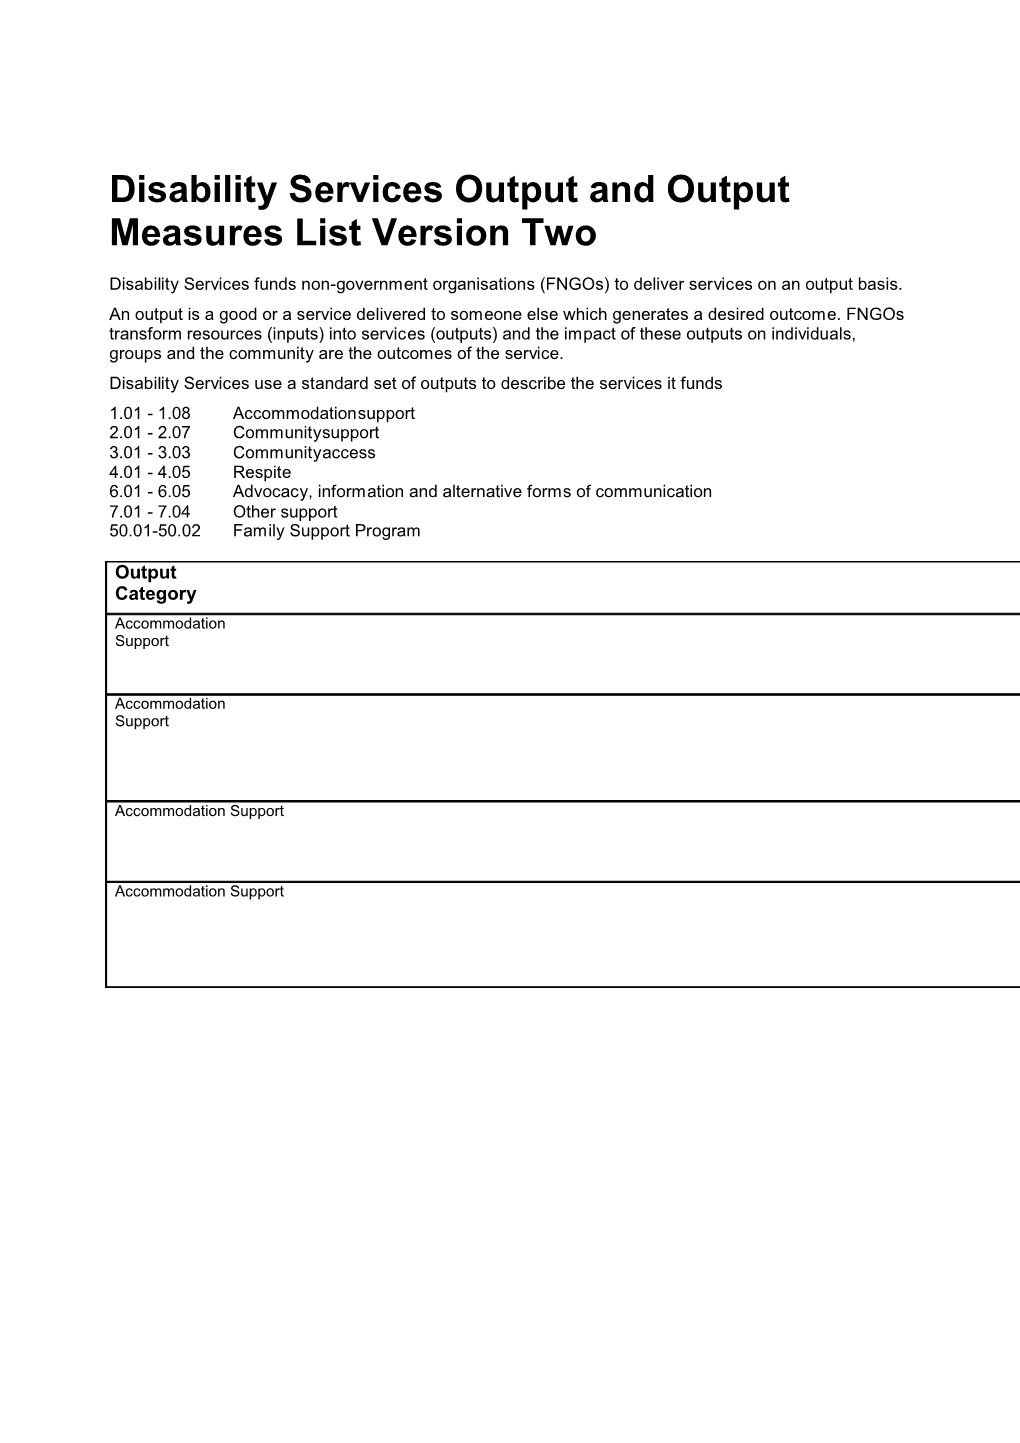 Disability Services Output and Output Measures List Version Two